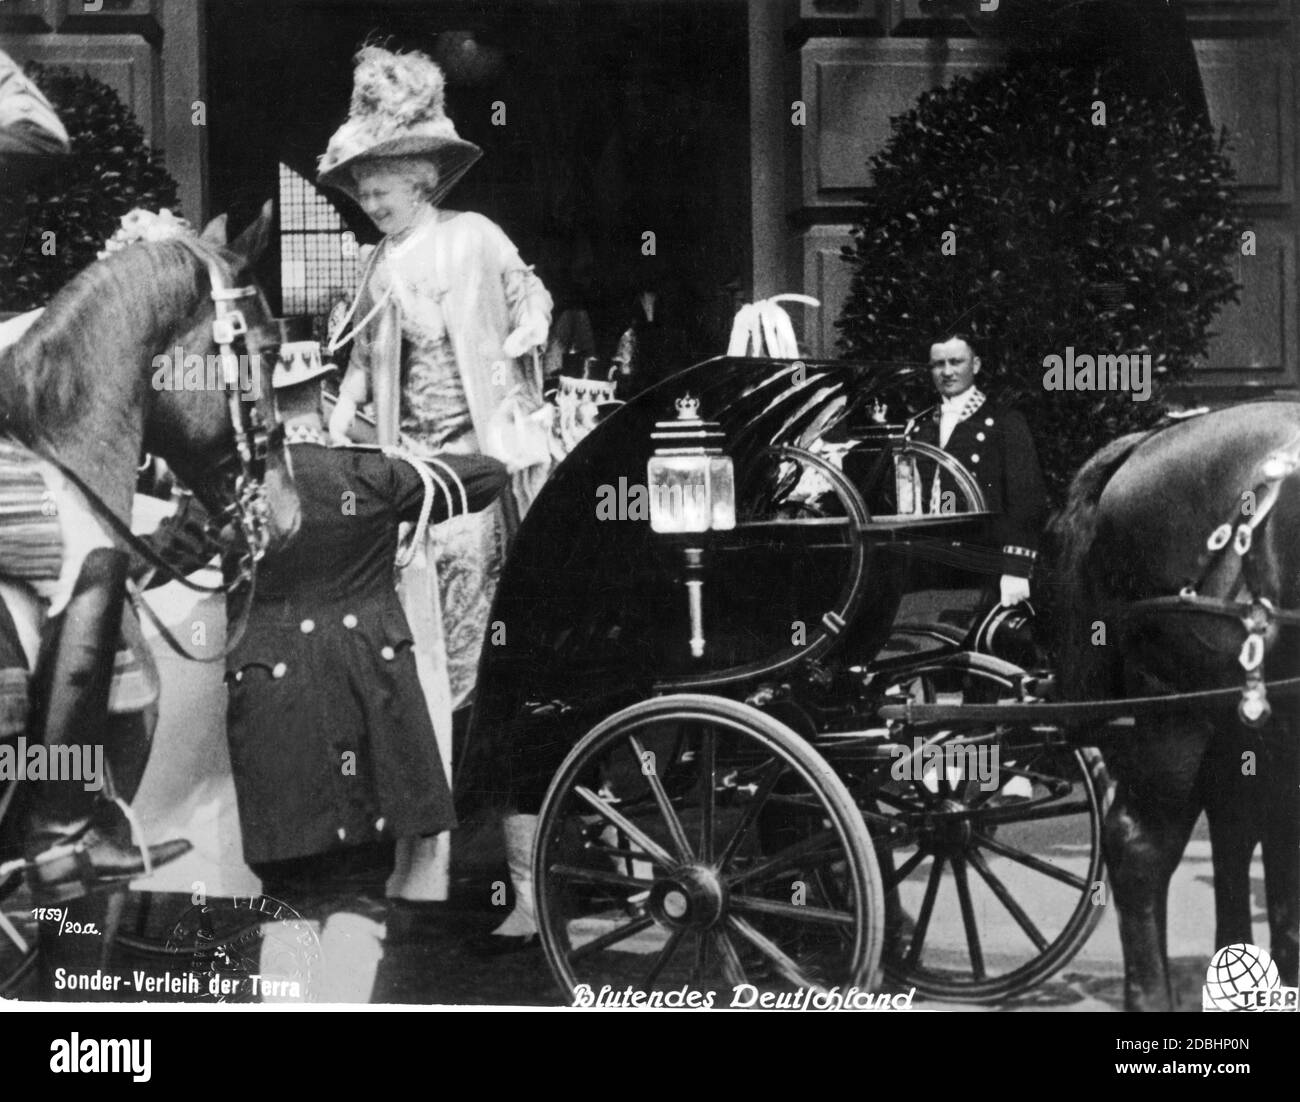 The British royal couple visited Berlin on May 29, 1913 on the occasion of the wedding of the Emperor's daughter Princess Victoria Louise to the Welf Prince Ernst August of Hanover, Duke of Cumberland. The photo shows the departure of the English Queen Mary (Mary of Teck, sitting in the carriage, covered) and the German Empress Augusta Victoria (center, standing) from Lehrter Bahnhof. Stock Photo